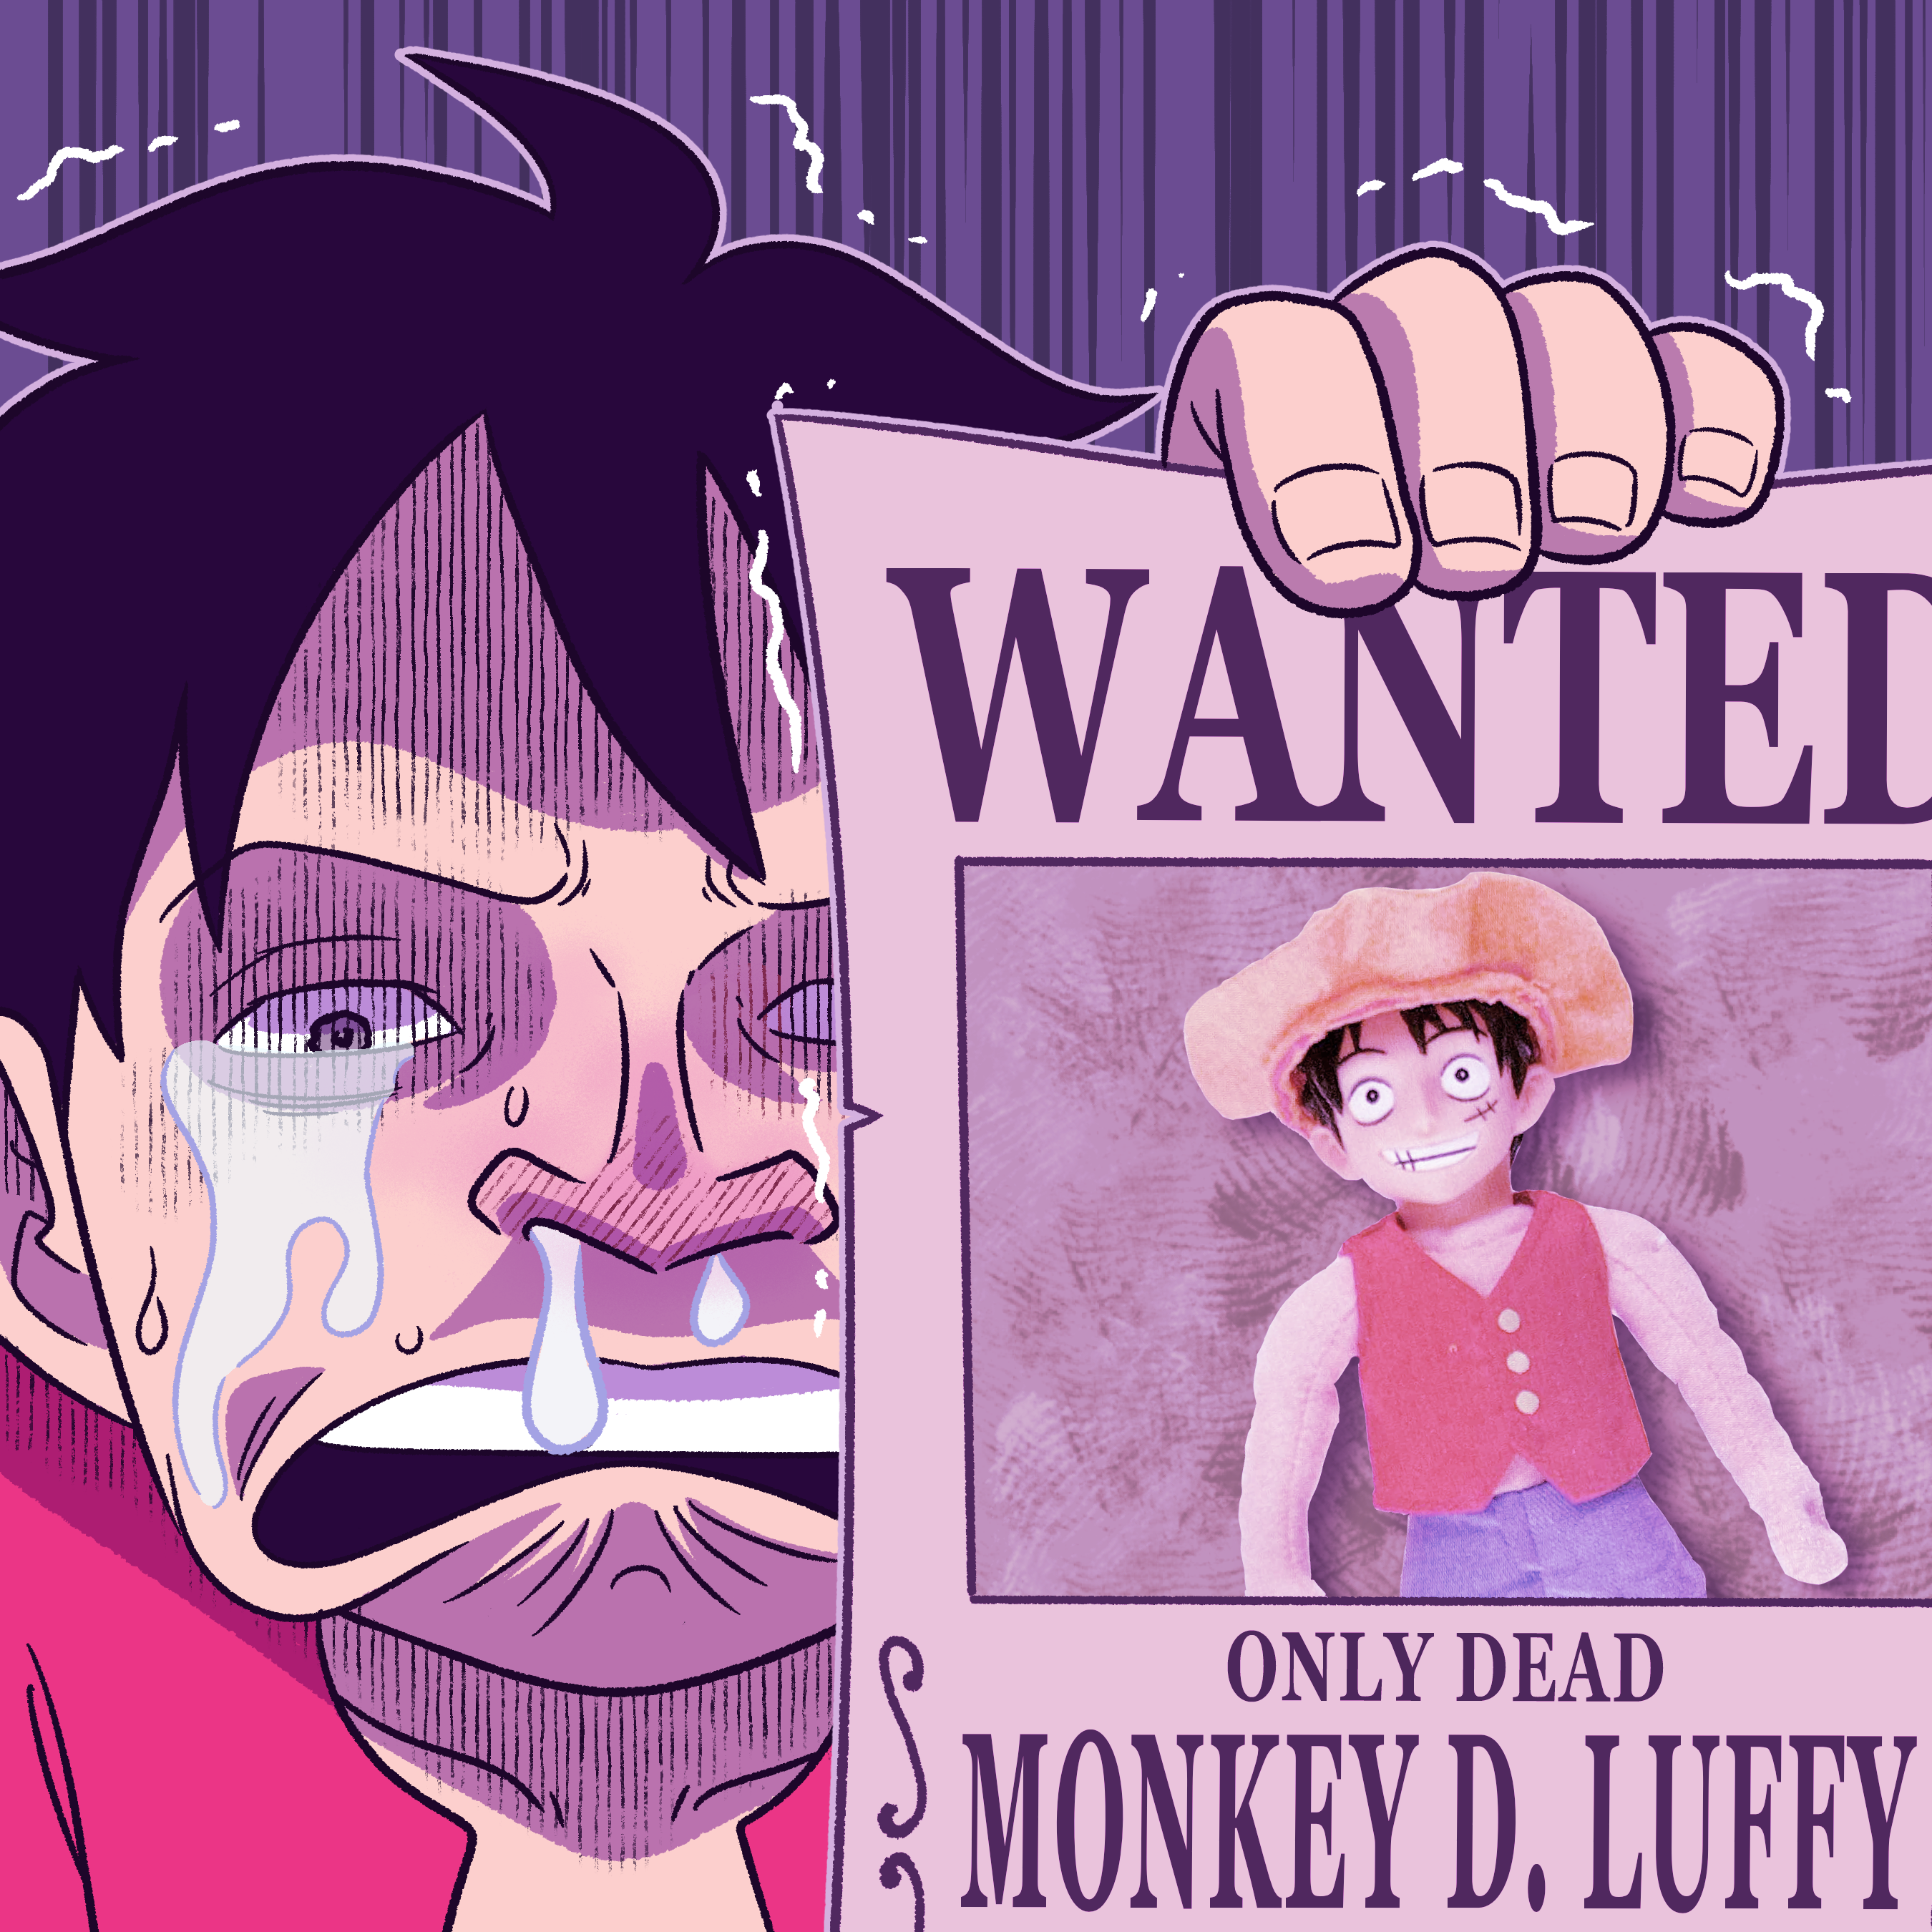 Episode 1070 - One Piece - Anime News Network